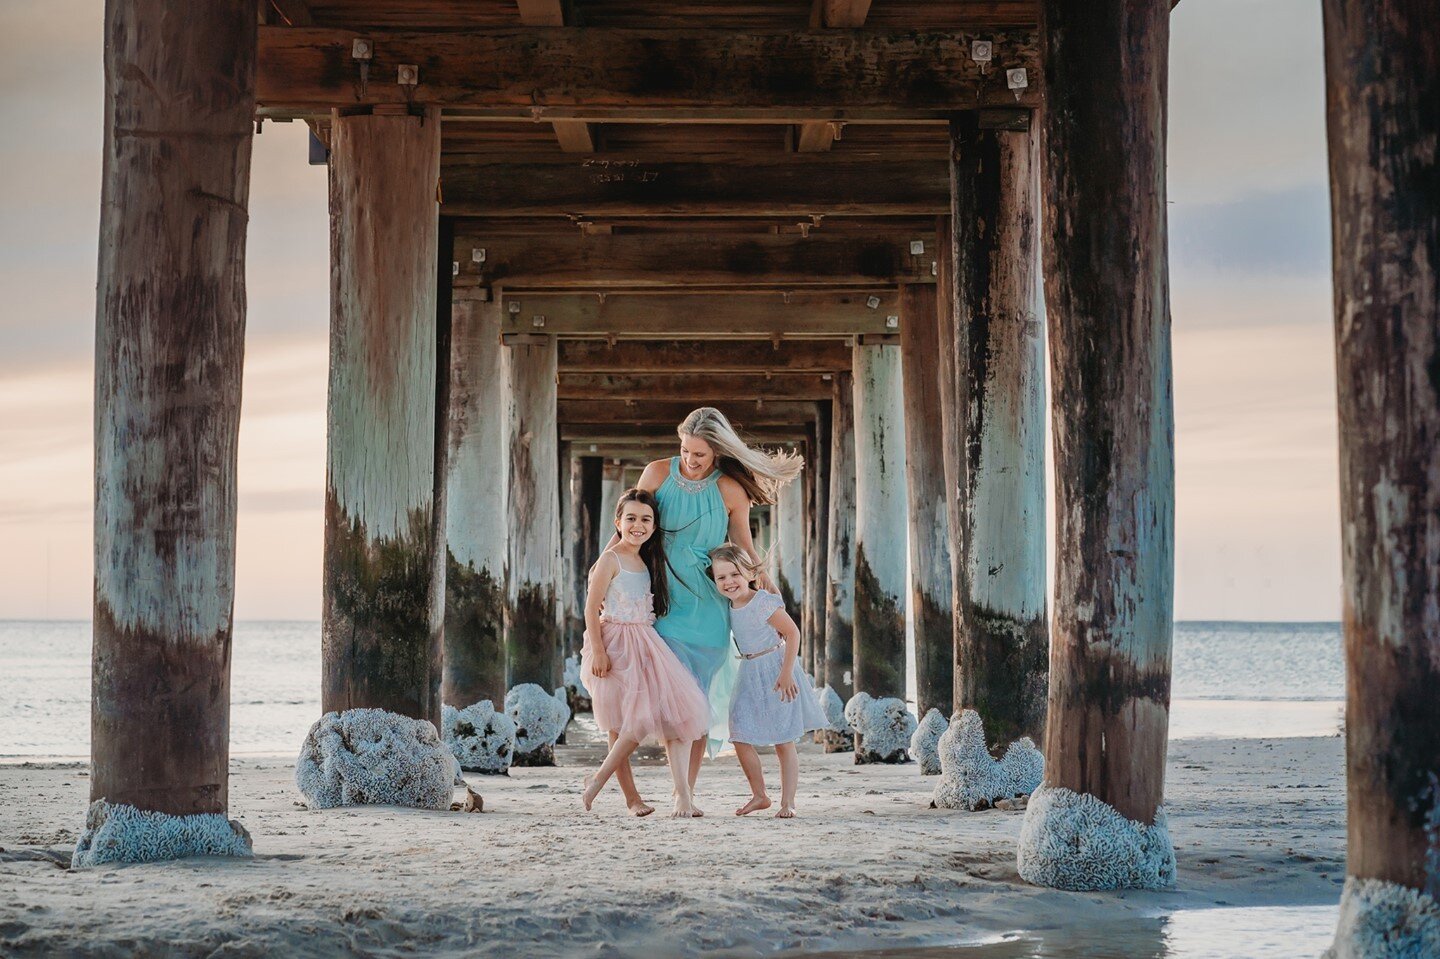 Sometimes I am not sure if I prefer portraits above or below the pier! ⁠
⁠
#motheranddaughters #seafordpier #seaford3198 #beachsunset #beachphotoshoot #sunsetportrait #familyphotography #familyphotoshoot #seafordbeach #familyphotographer #beachphotog